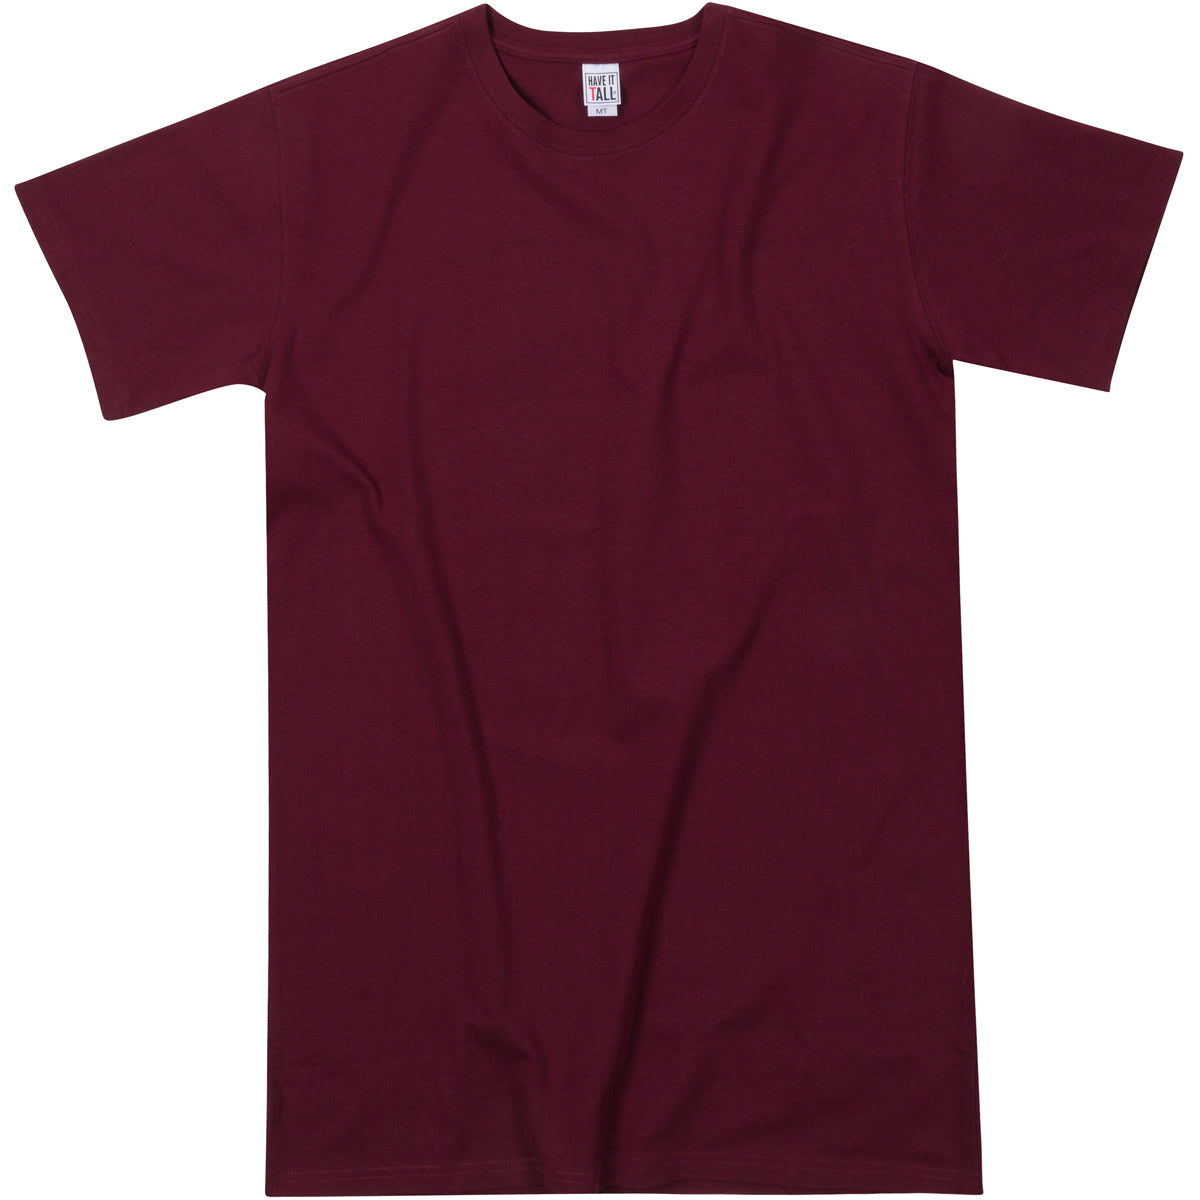 Have It Tall Short Sleeve T-Shirt - Cotton/Spandex 4 Way Stretch